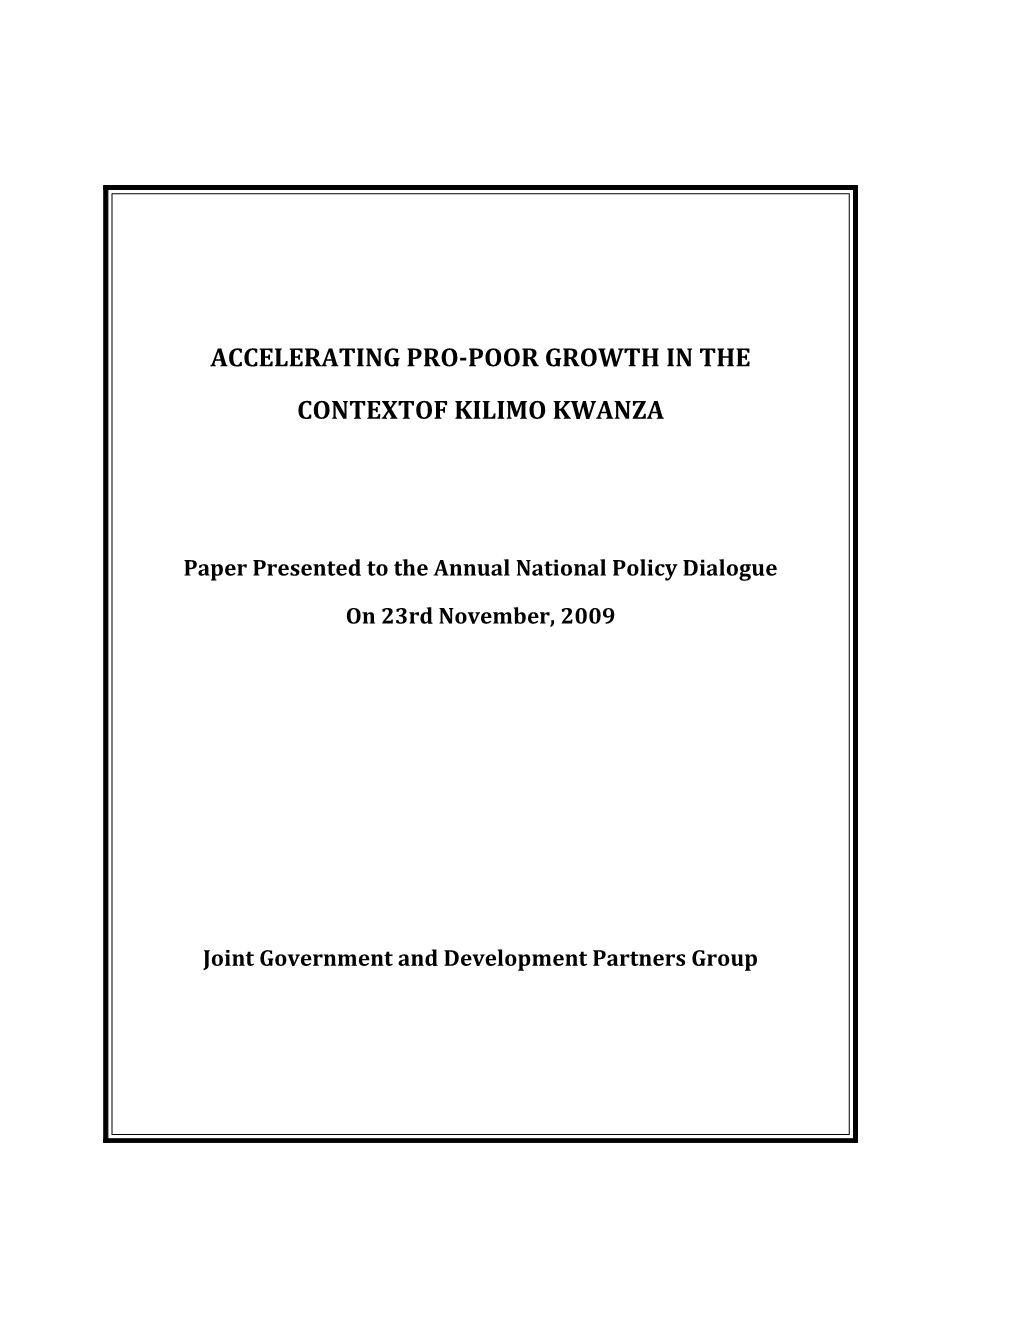 Joint Paper Between The Government Of The United Republic Of Tanzania And Development Partners: